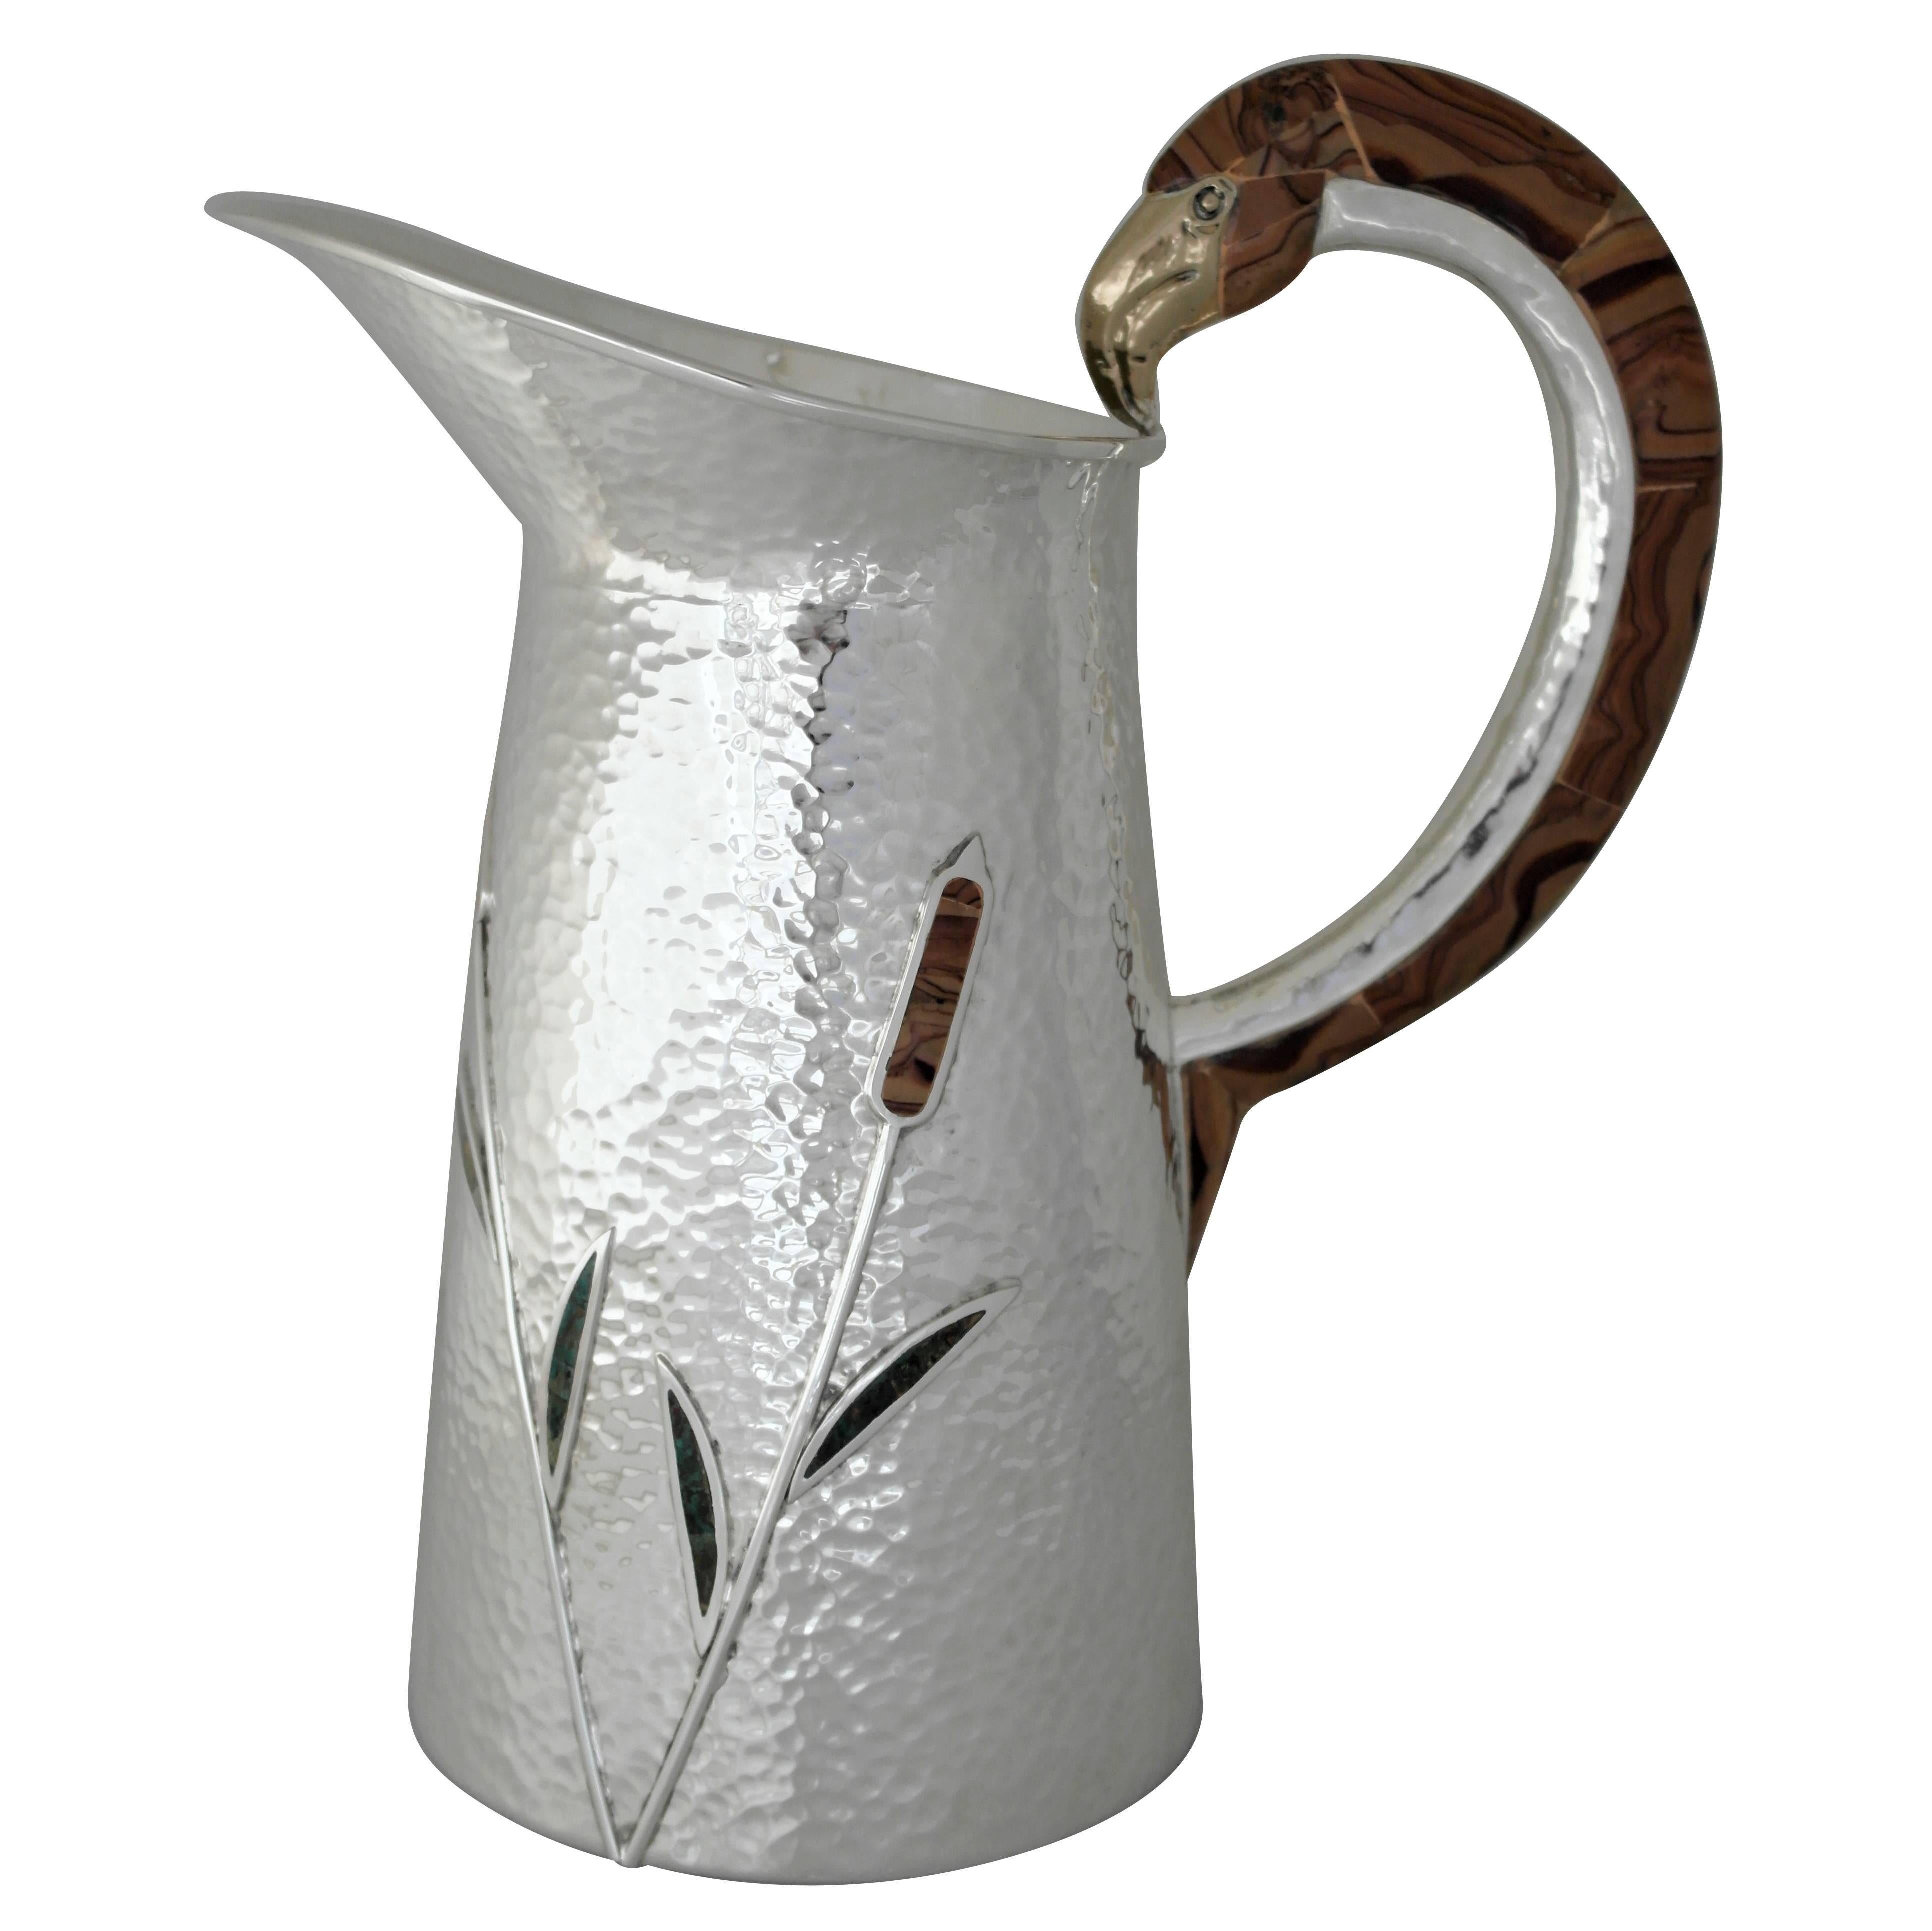 INCREDIBLE Mixed Metal Stone Castillo Hand-Wrought Silver Plate Pitcher, 1990 For Sale